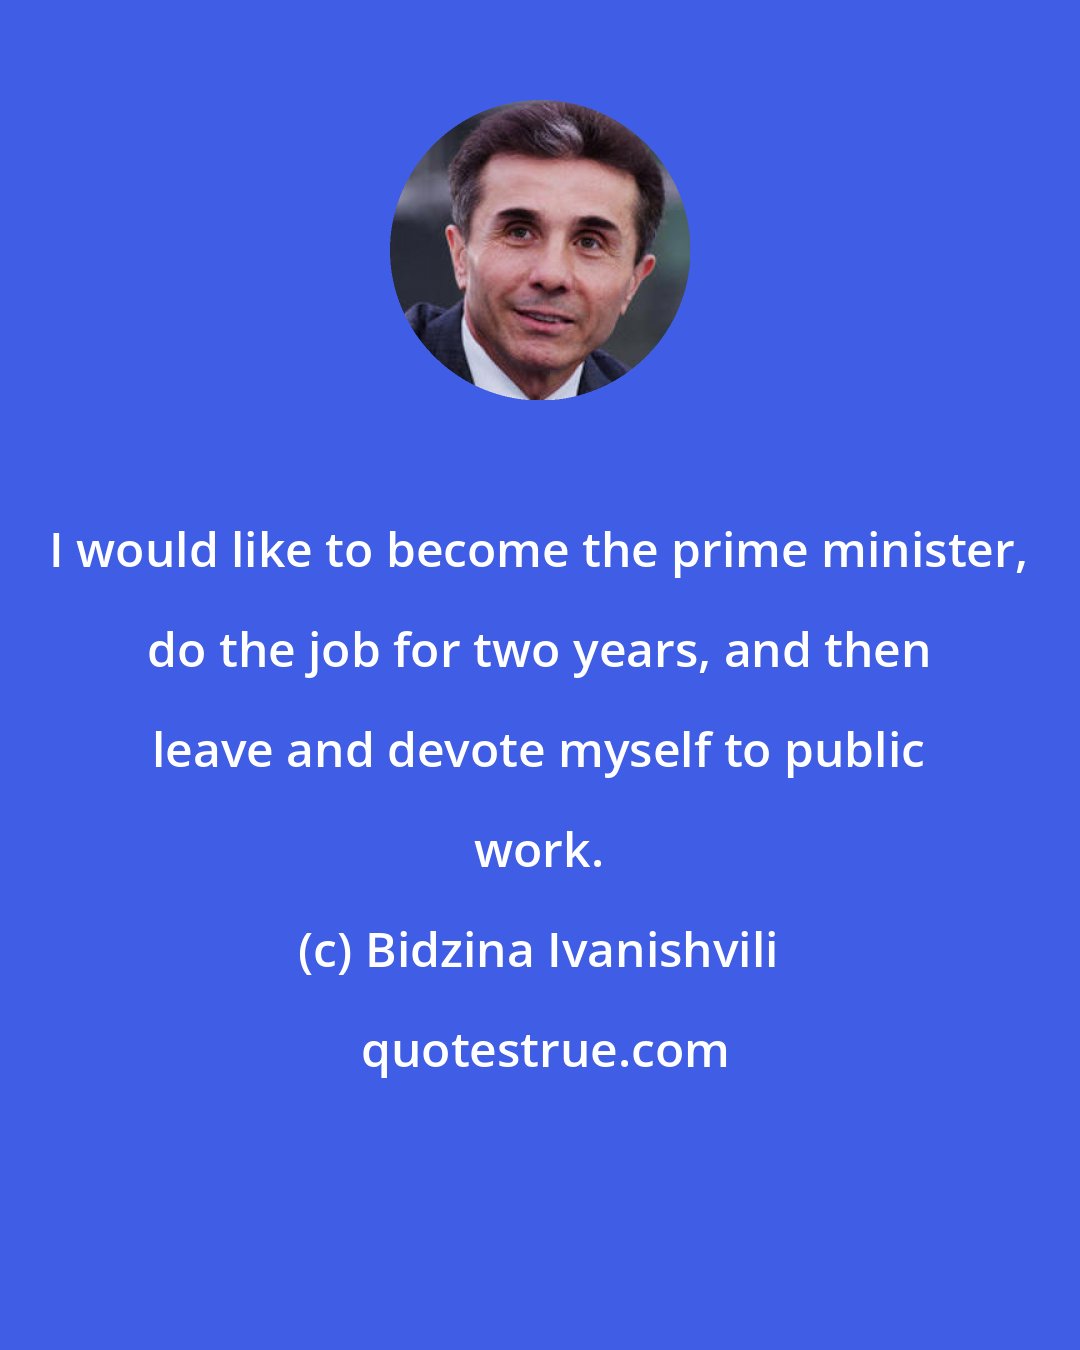 Bidzina Ivanishvili: I would like to become the prime minister, do the job for two years, and then leave and devote myself to public work.